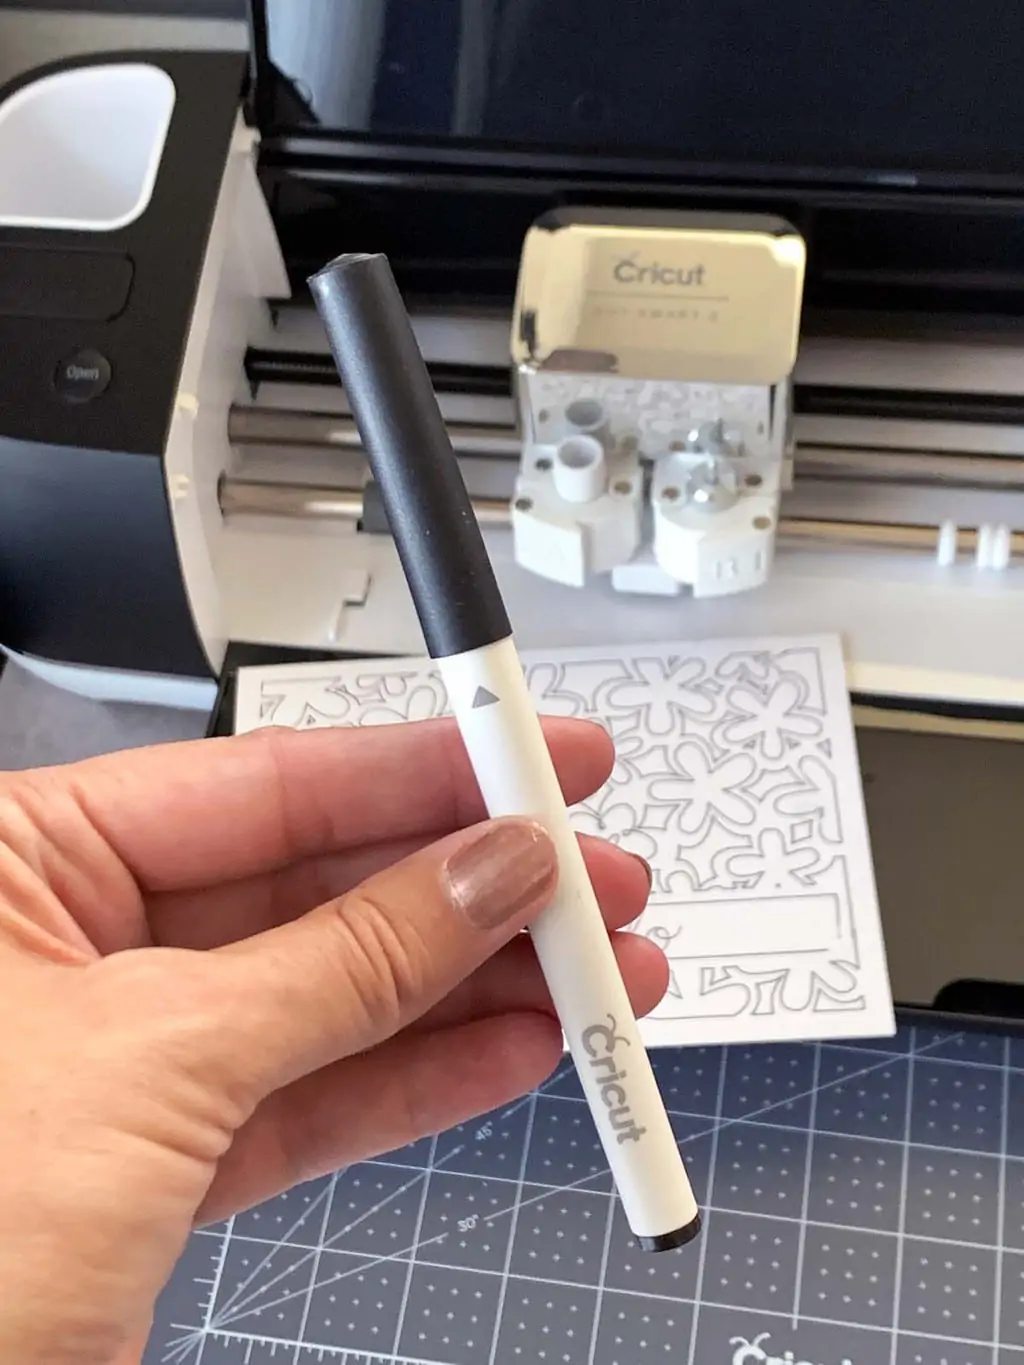 Select the tools you need to create your Cricut project